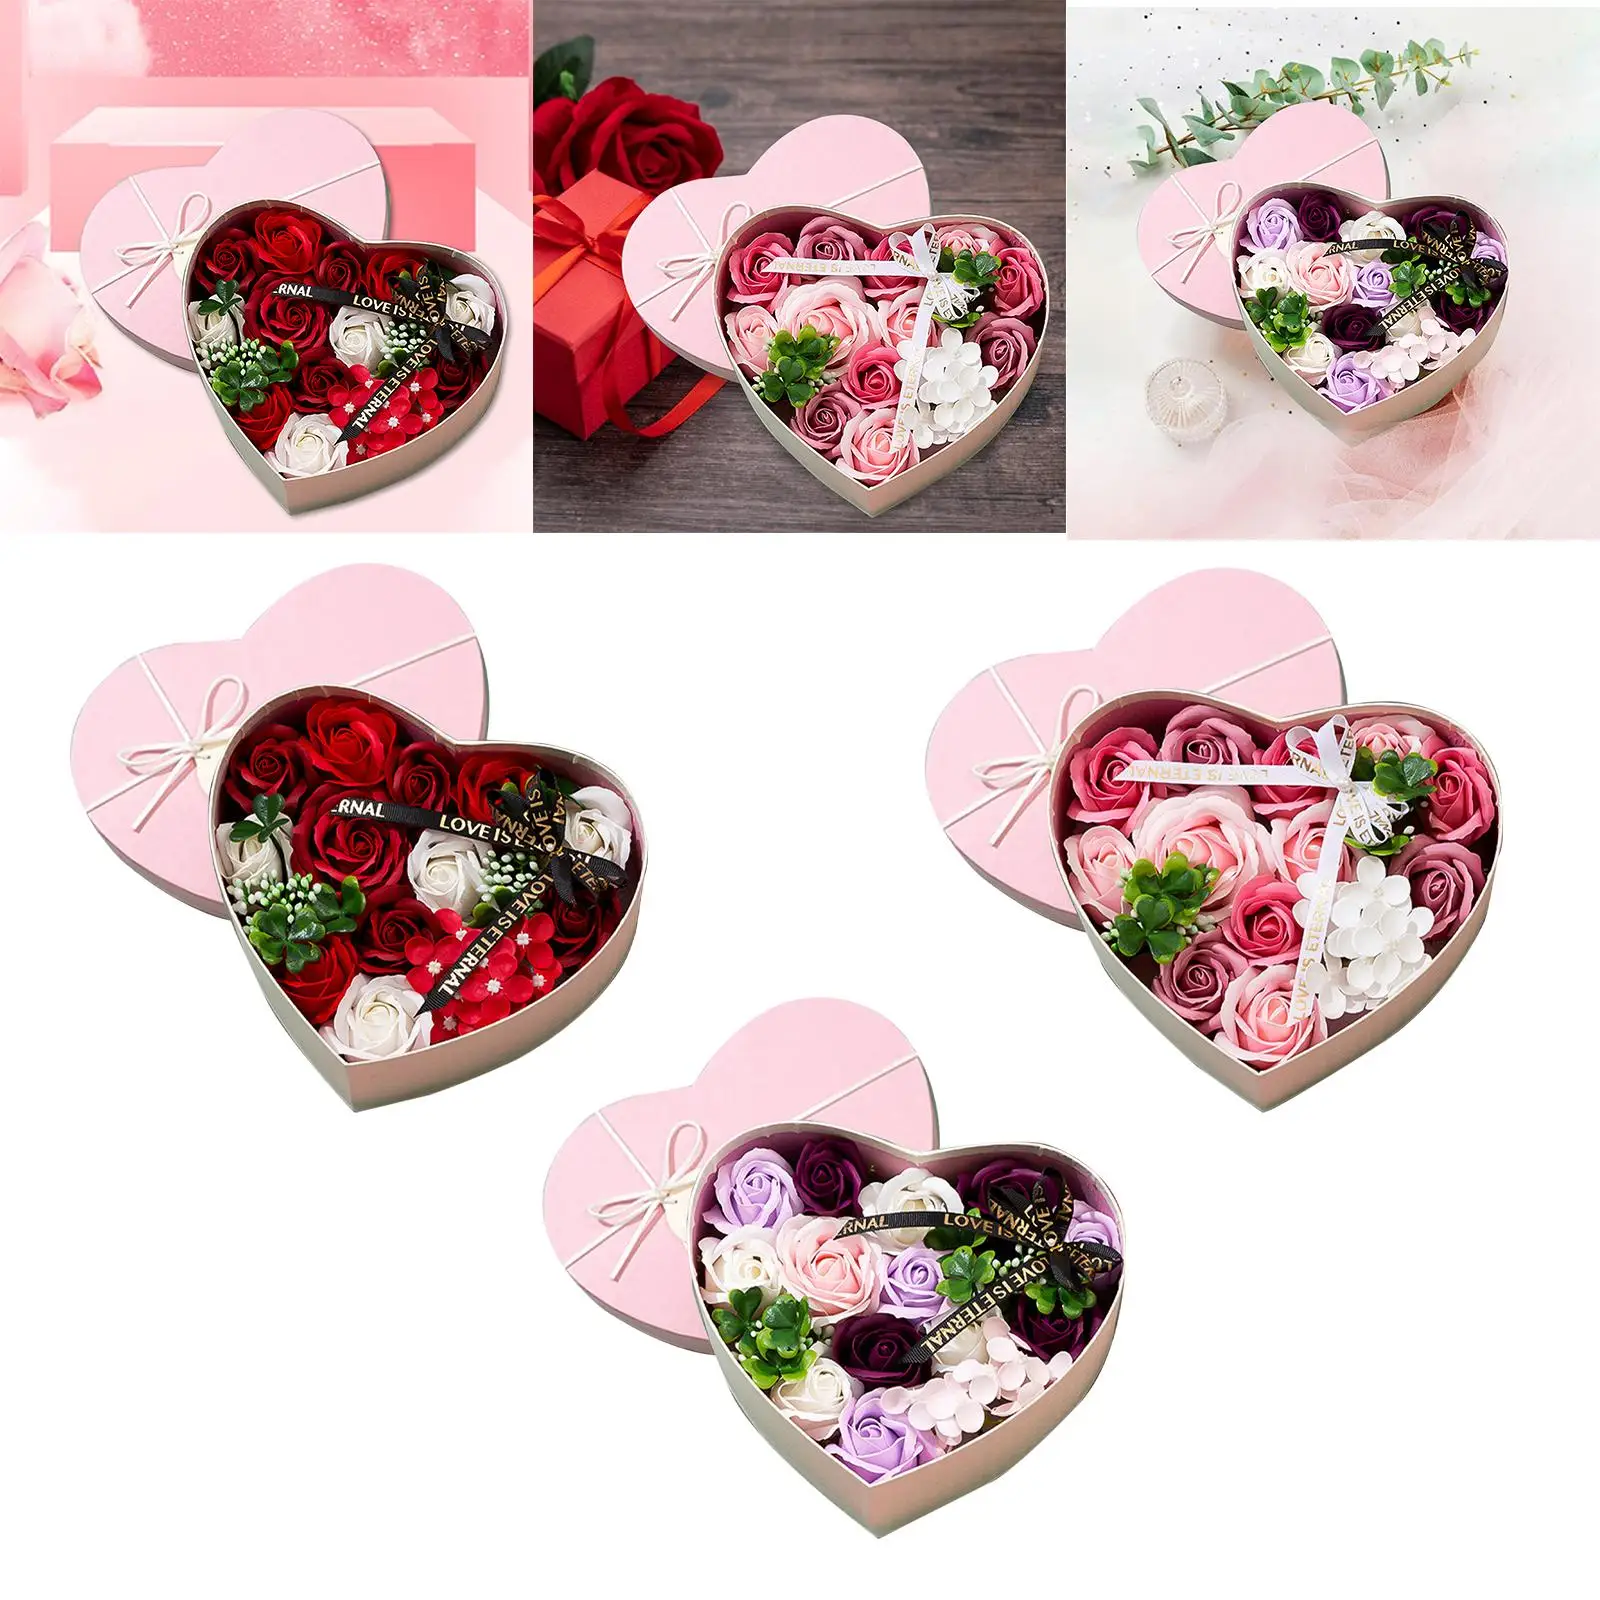 Rose Soap Flowers Bouquet Bath Soap Home Decoration Valentines Day Gifts for Anniversary Birthday Wedding Thanksgiving Day Girls